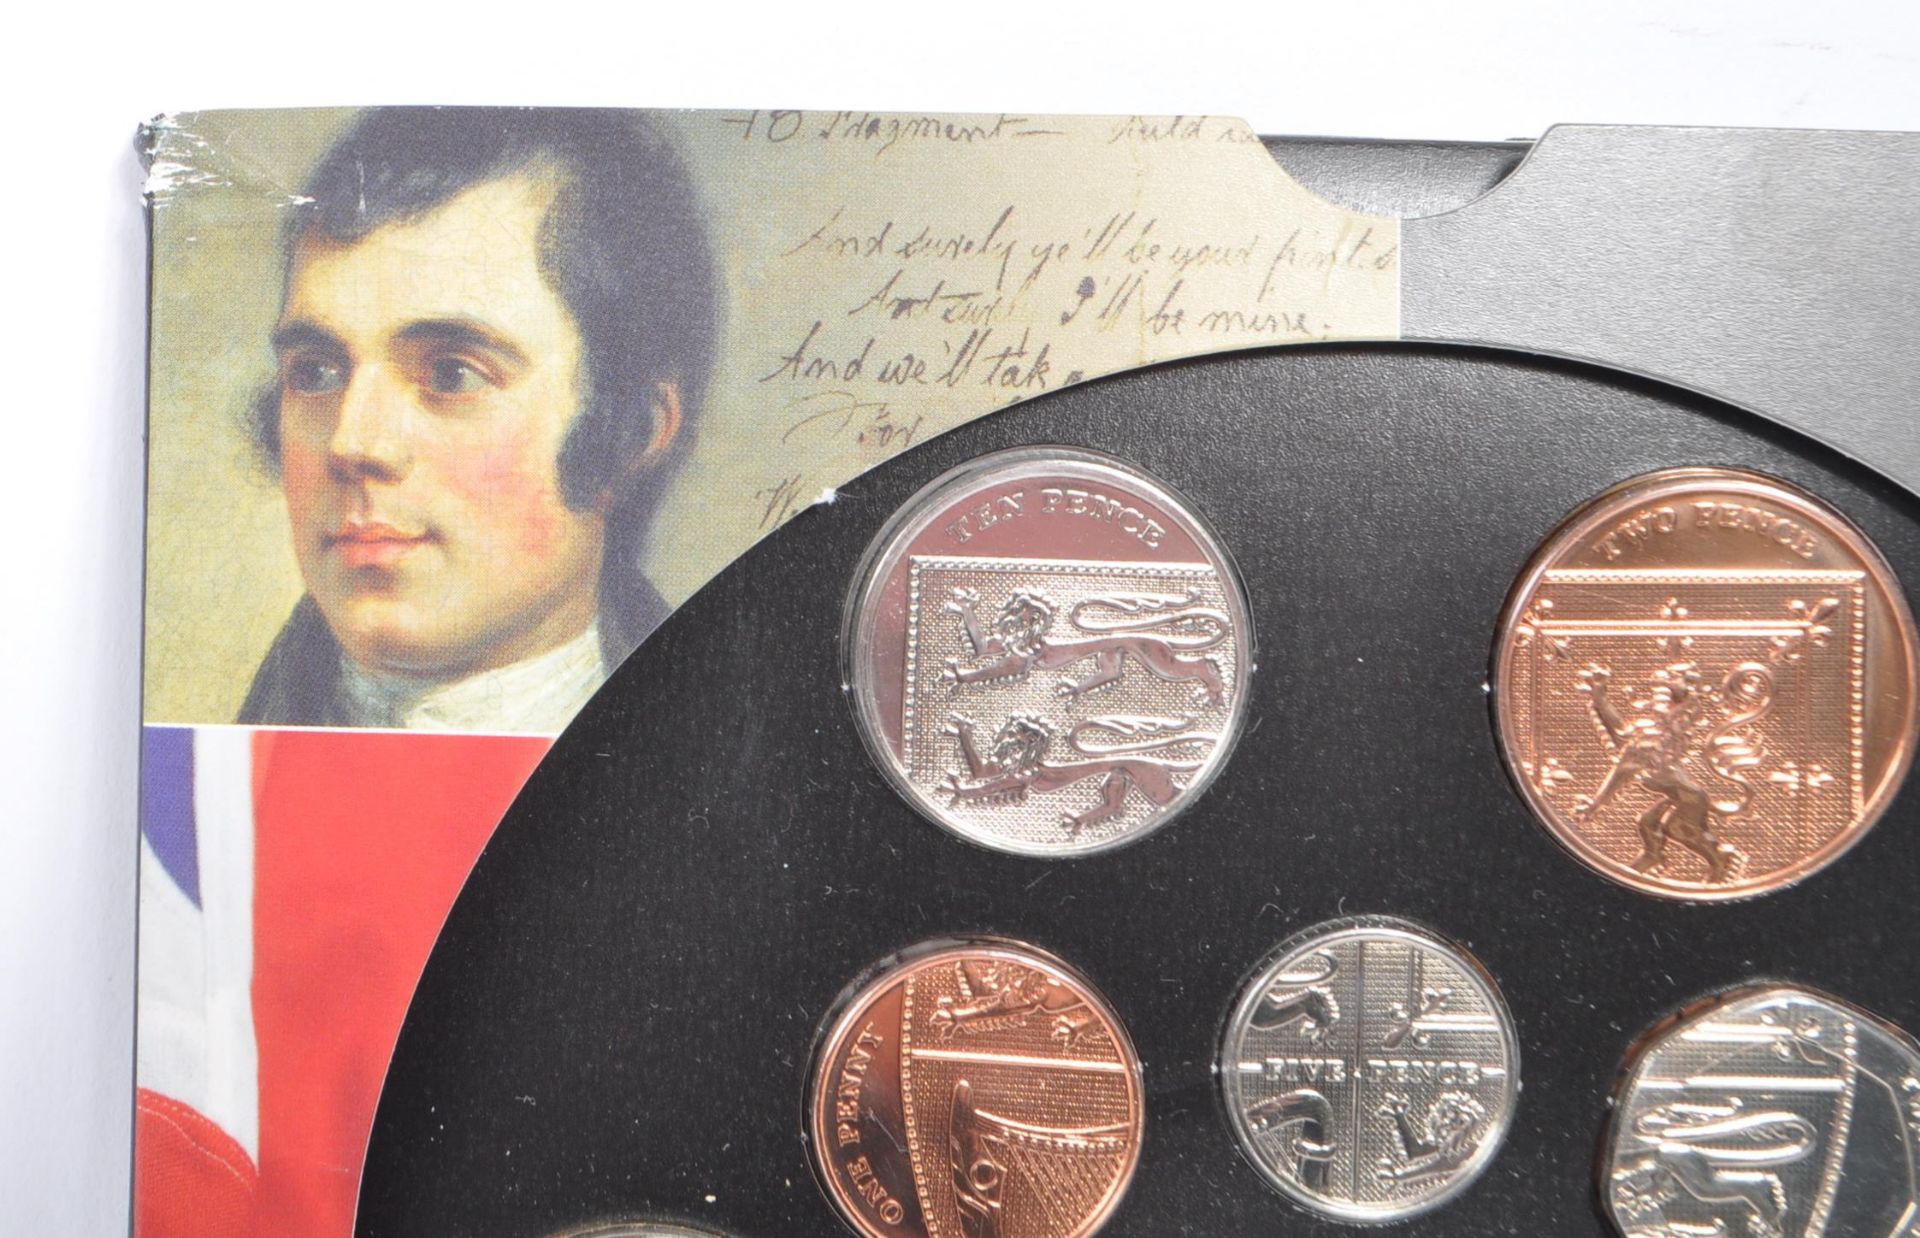 2009 ROYAL MINT UK BRILLIANT UNCIRCULATED COIN COLLECTION - Image 4 of 4